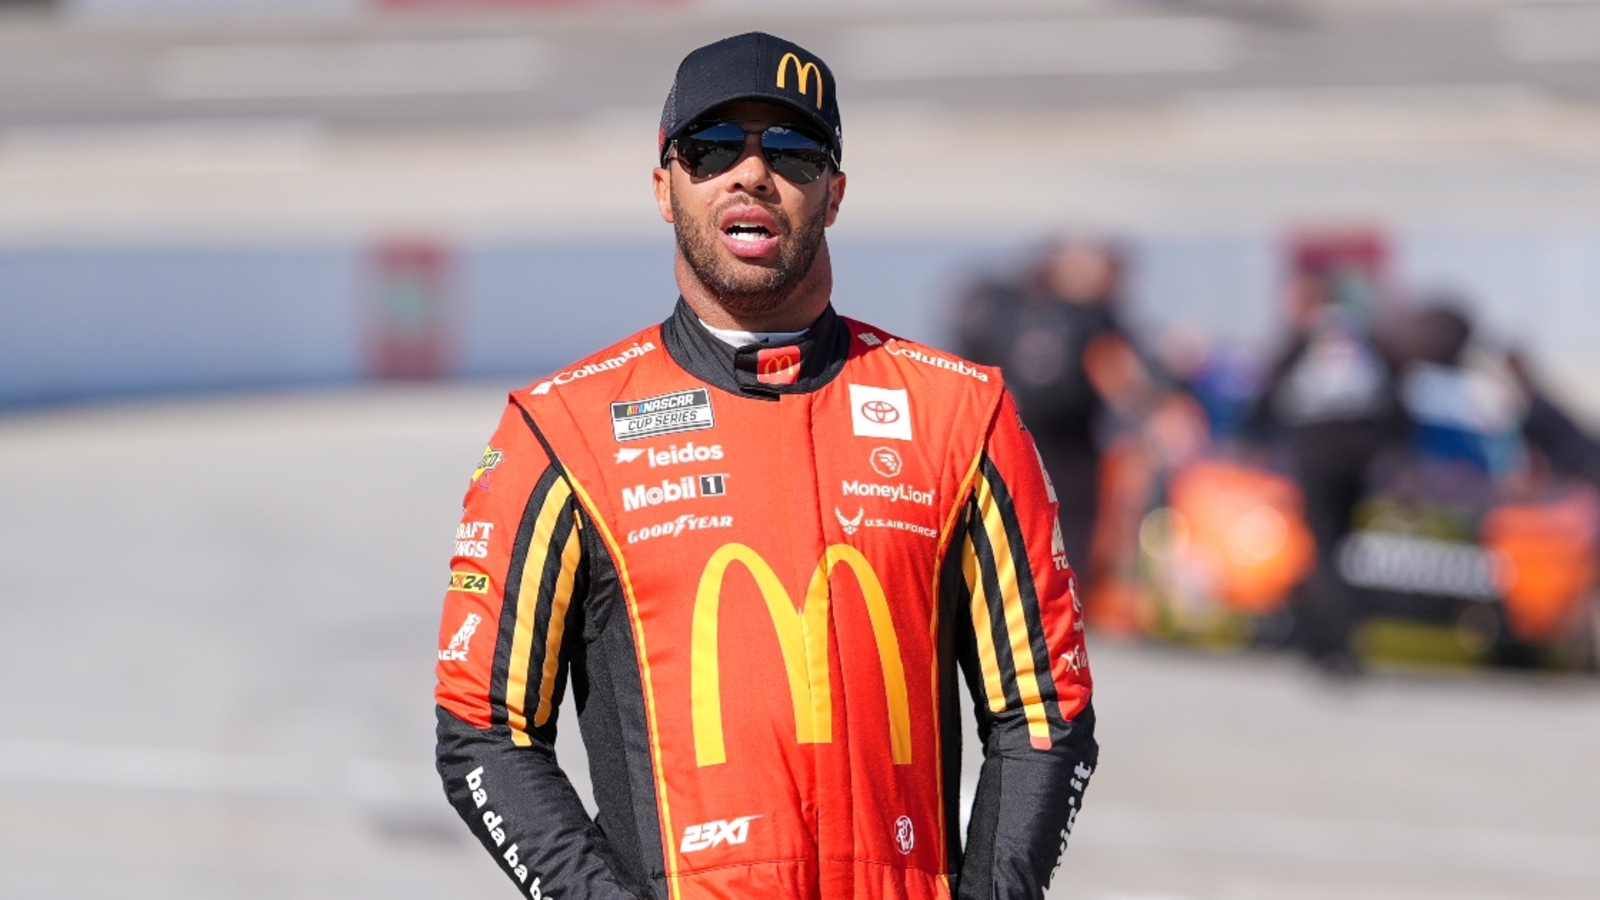 Bubba Wallace opens up on weight of expectations as only Black driver in NASCAR Cup Series